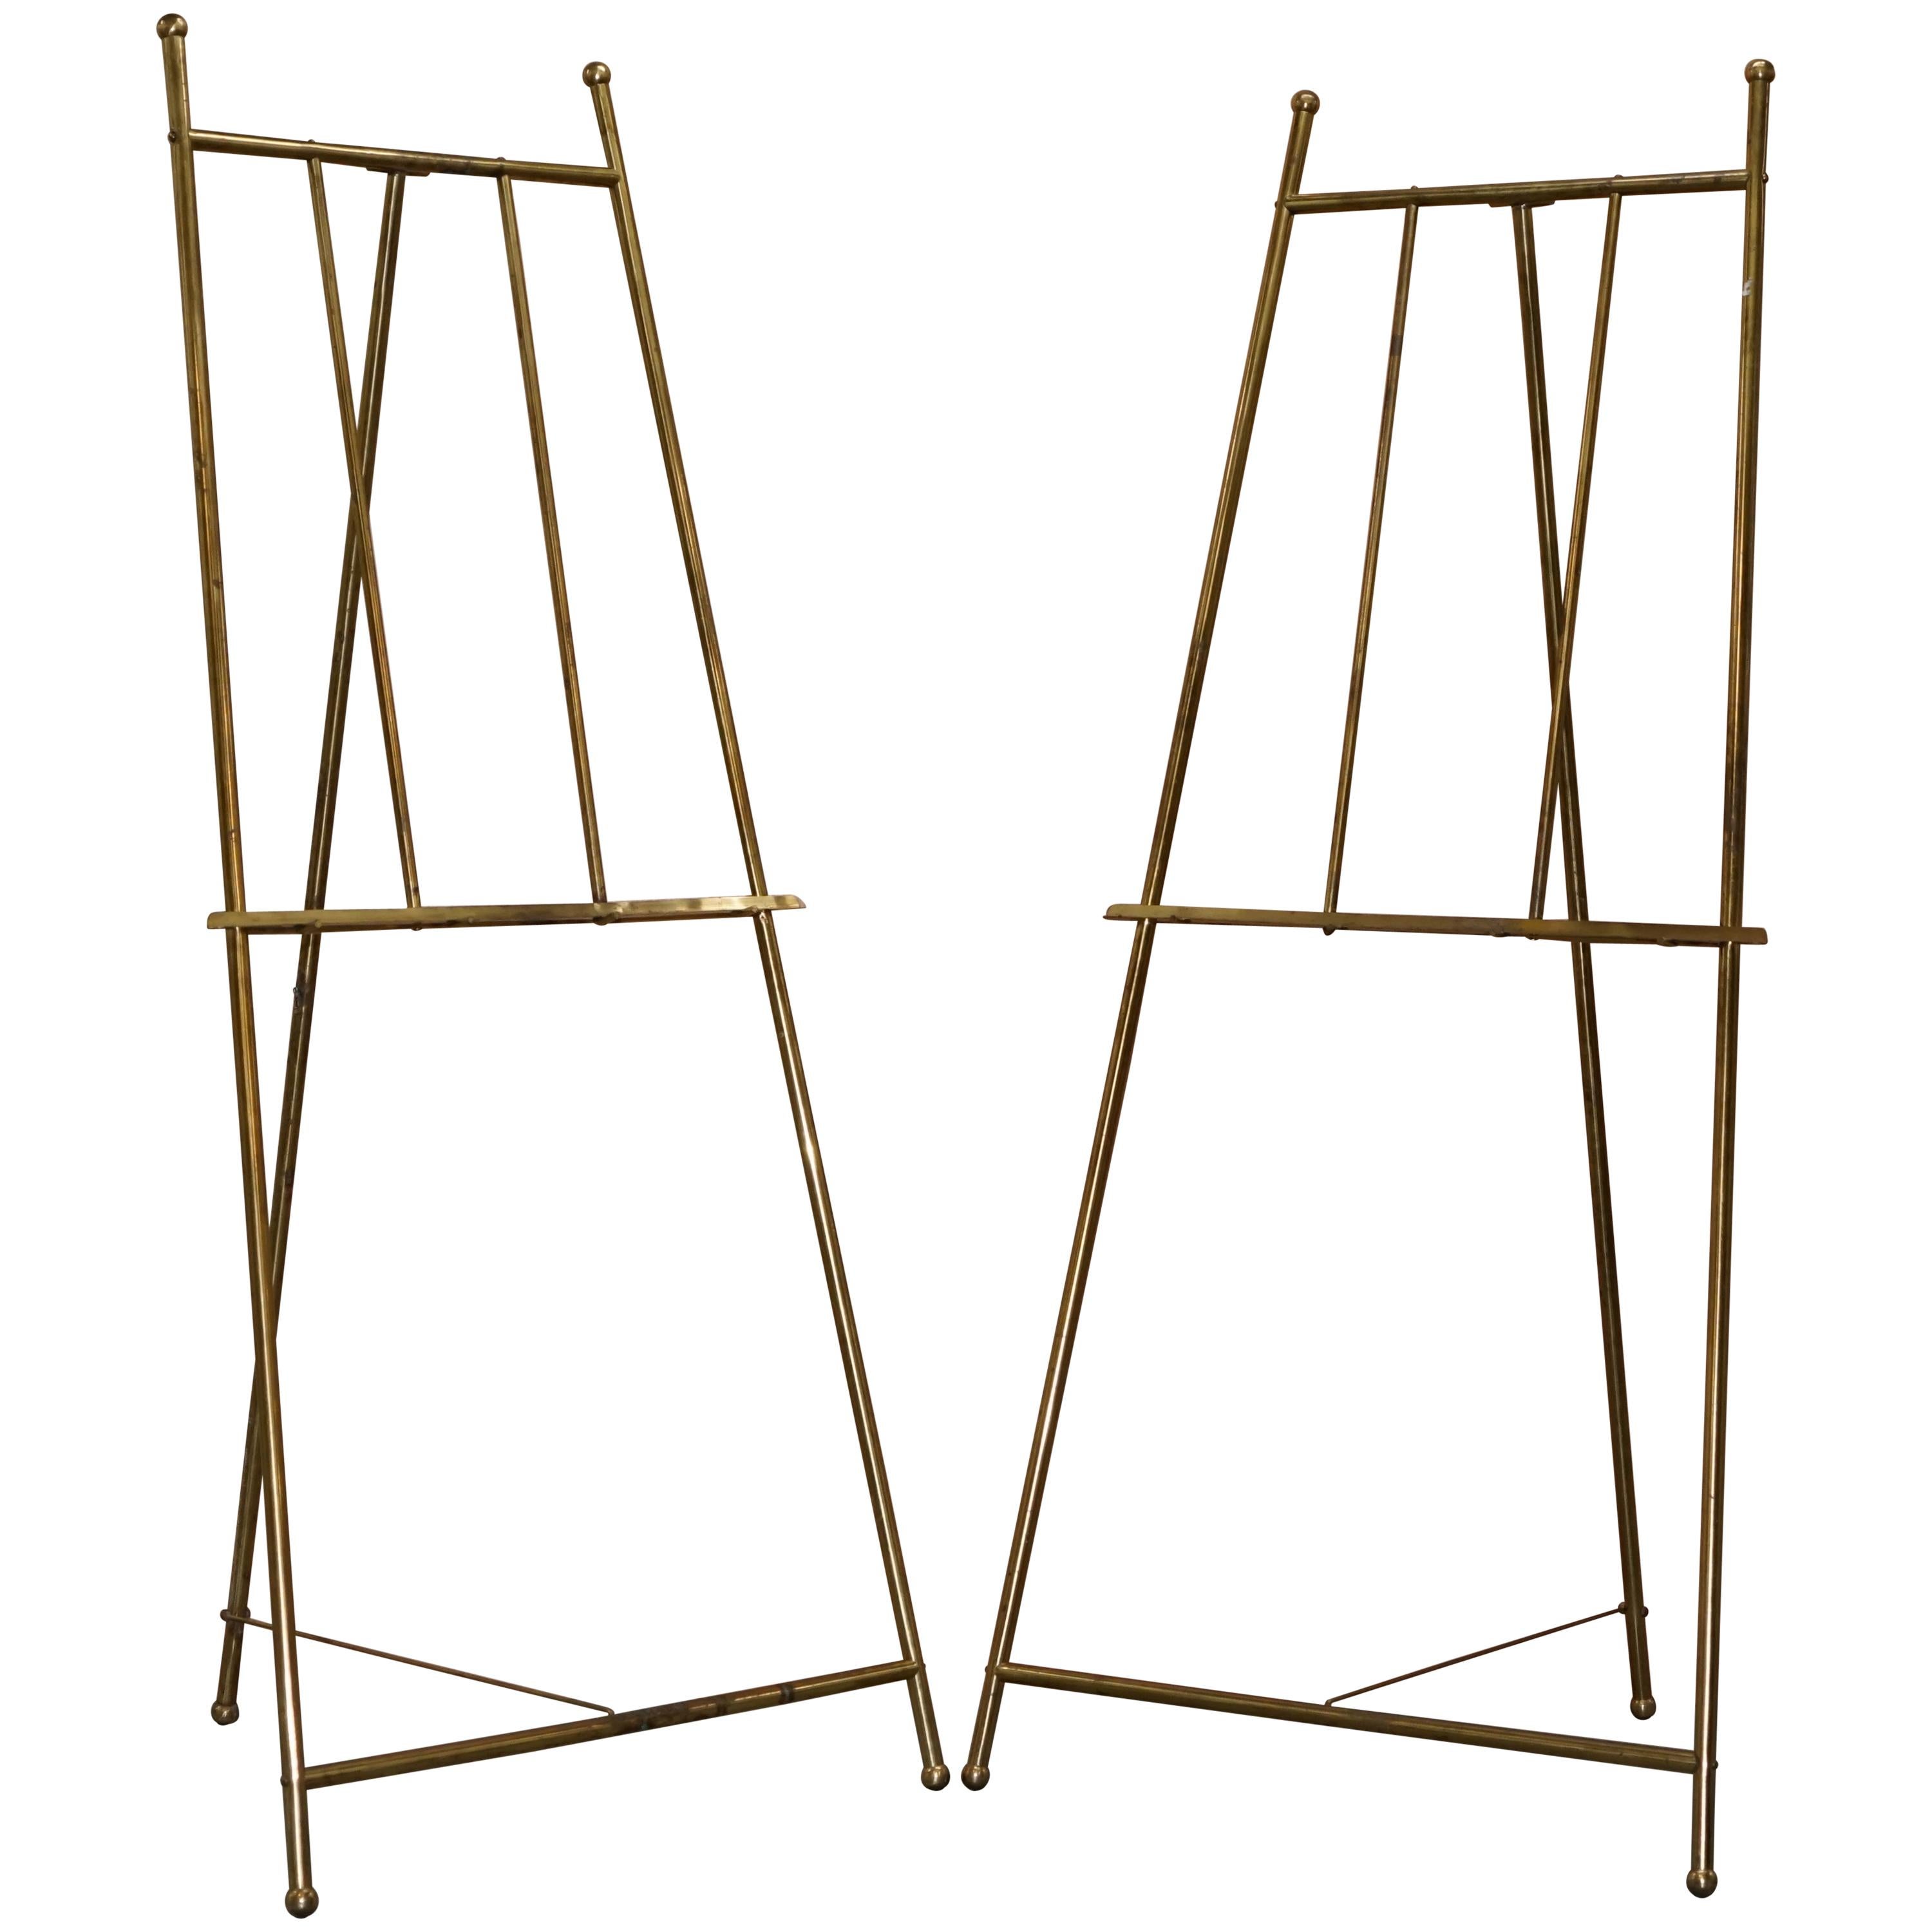 PAIR OF VINTAGE BRASS LARGE 203CM TALL FOLDING ARTIST EASELs PICTURE DISPLAY